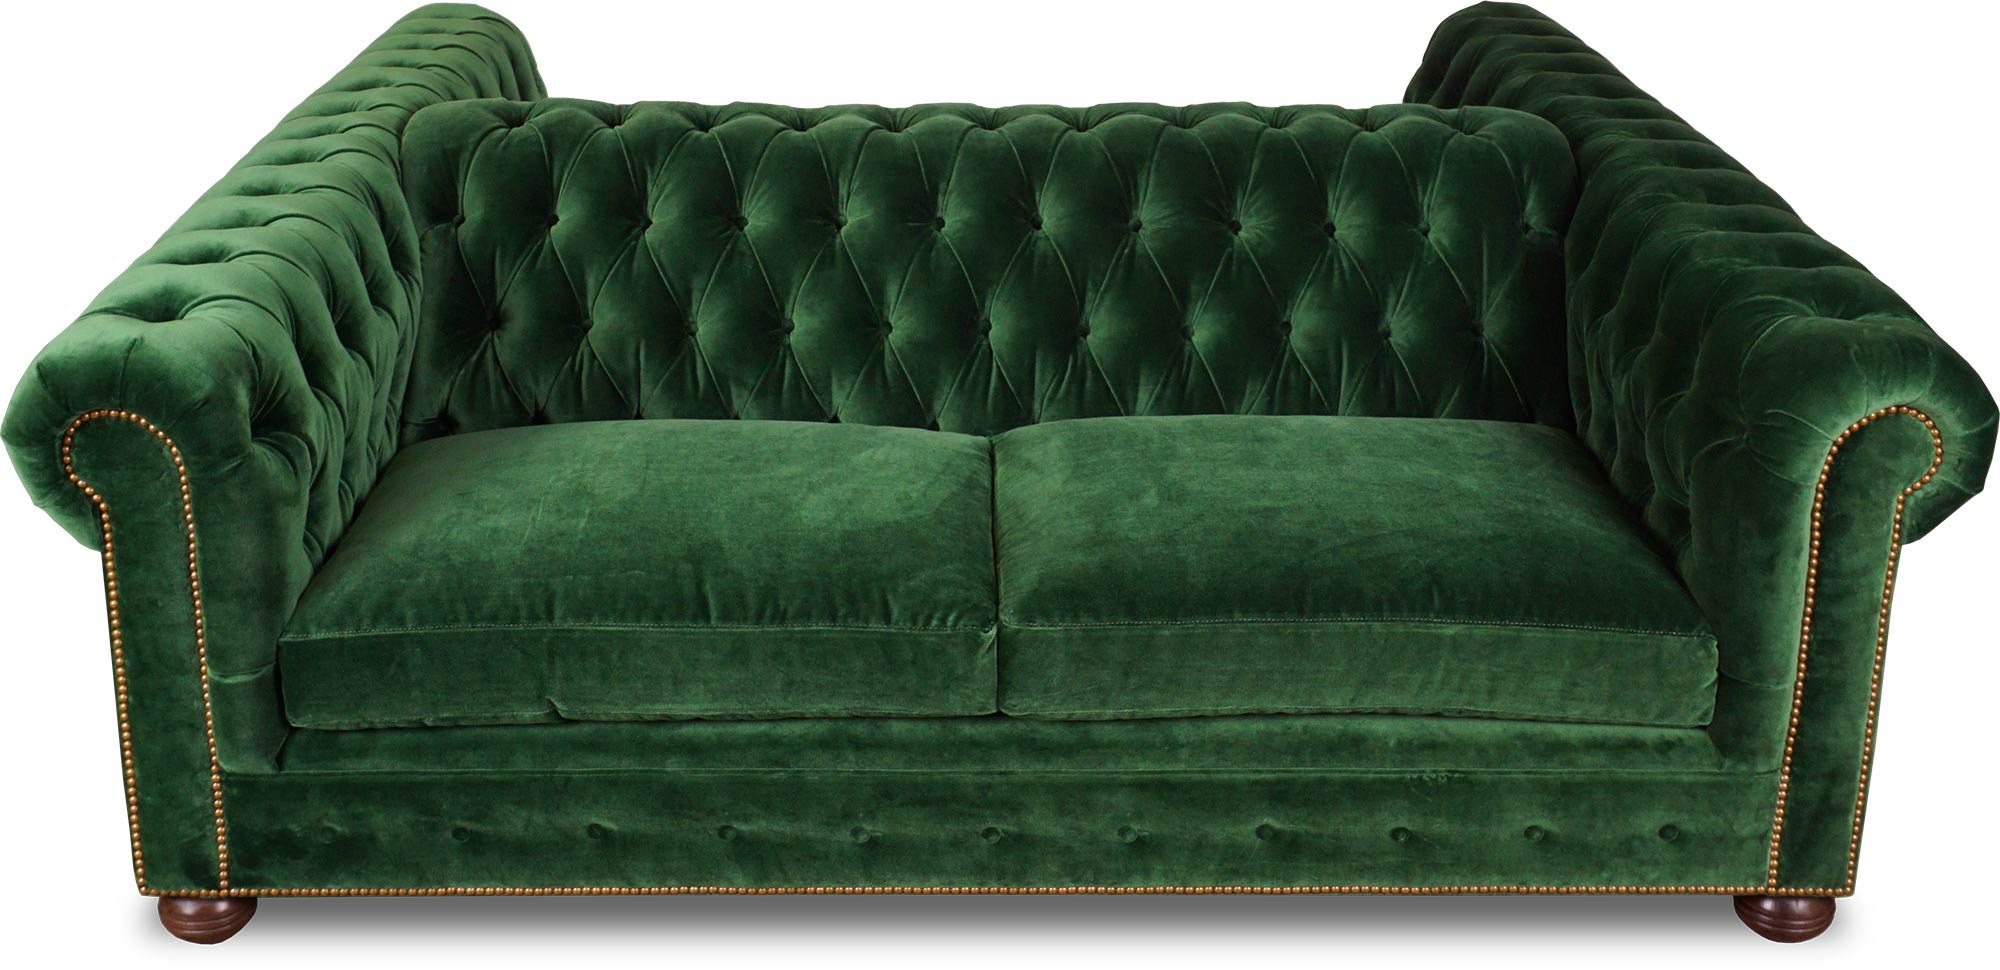 Janus Dual Sided Chesterfield Sofa Roger Chris Green leather chesterfield style sofa,no rips or missing studs has ball claw feet and a curved back there is. janus dual sided chesterfield sofa